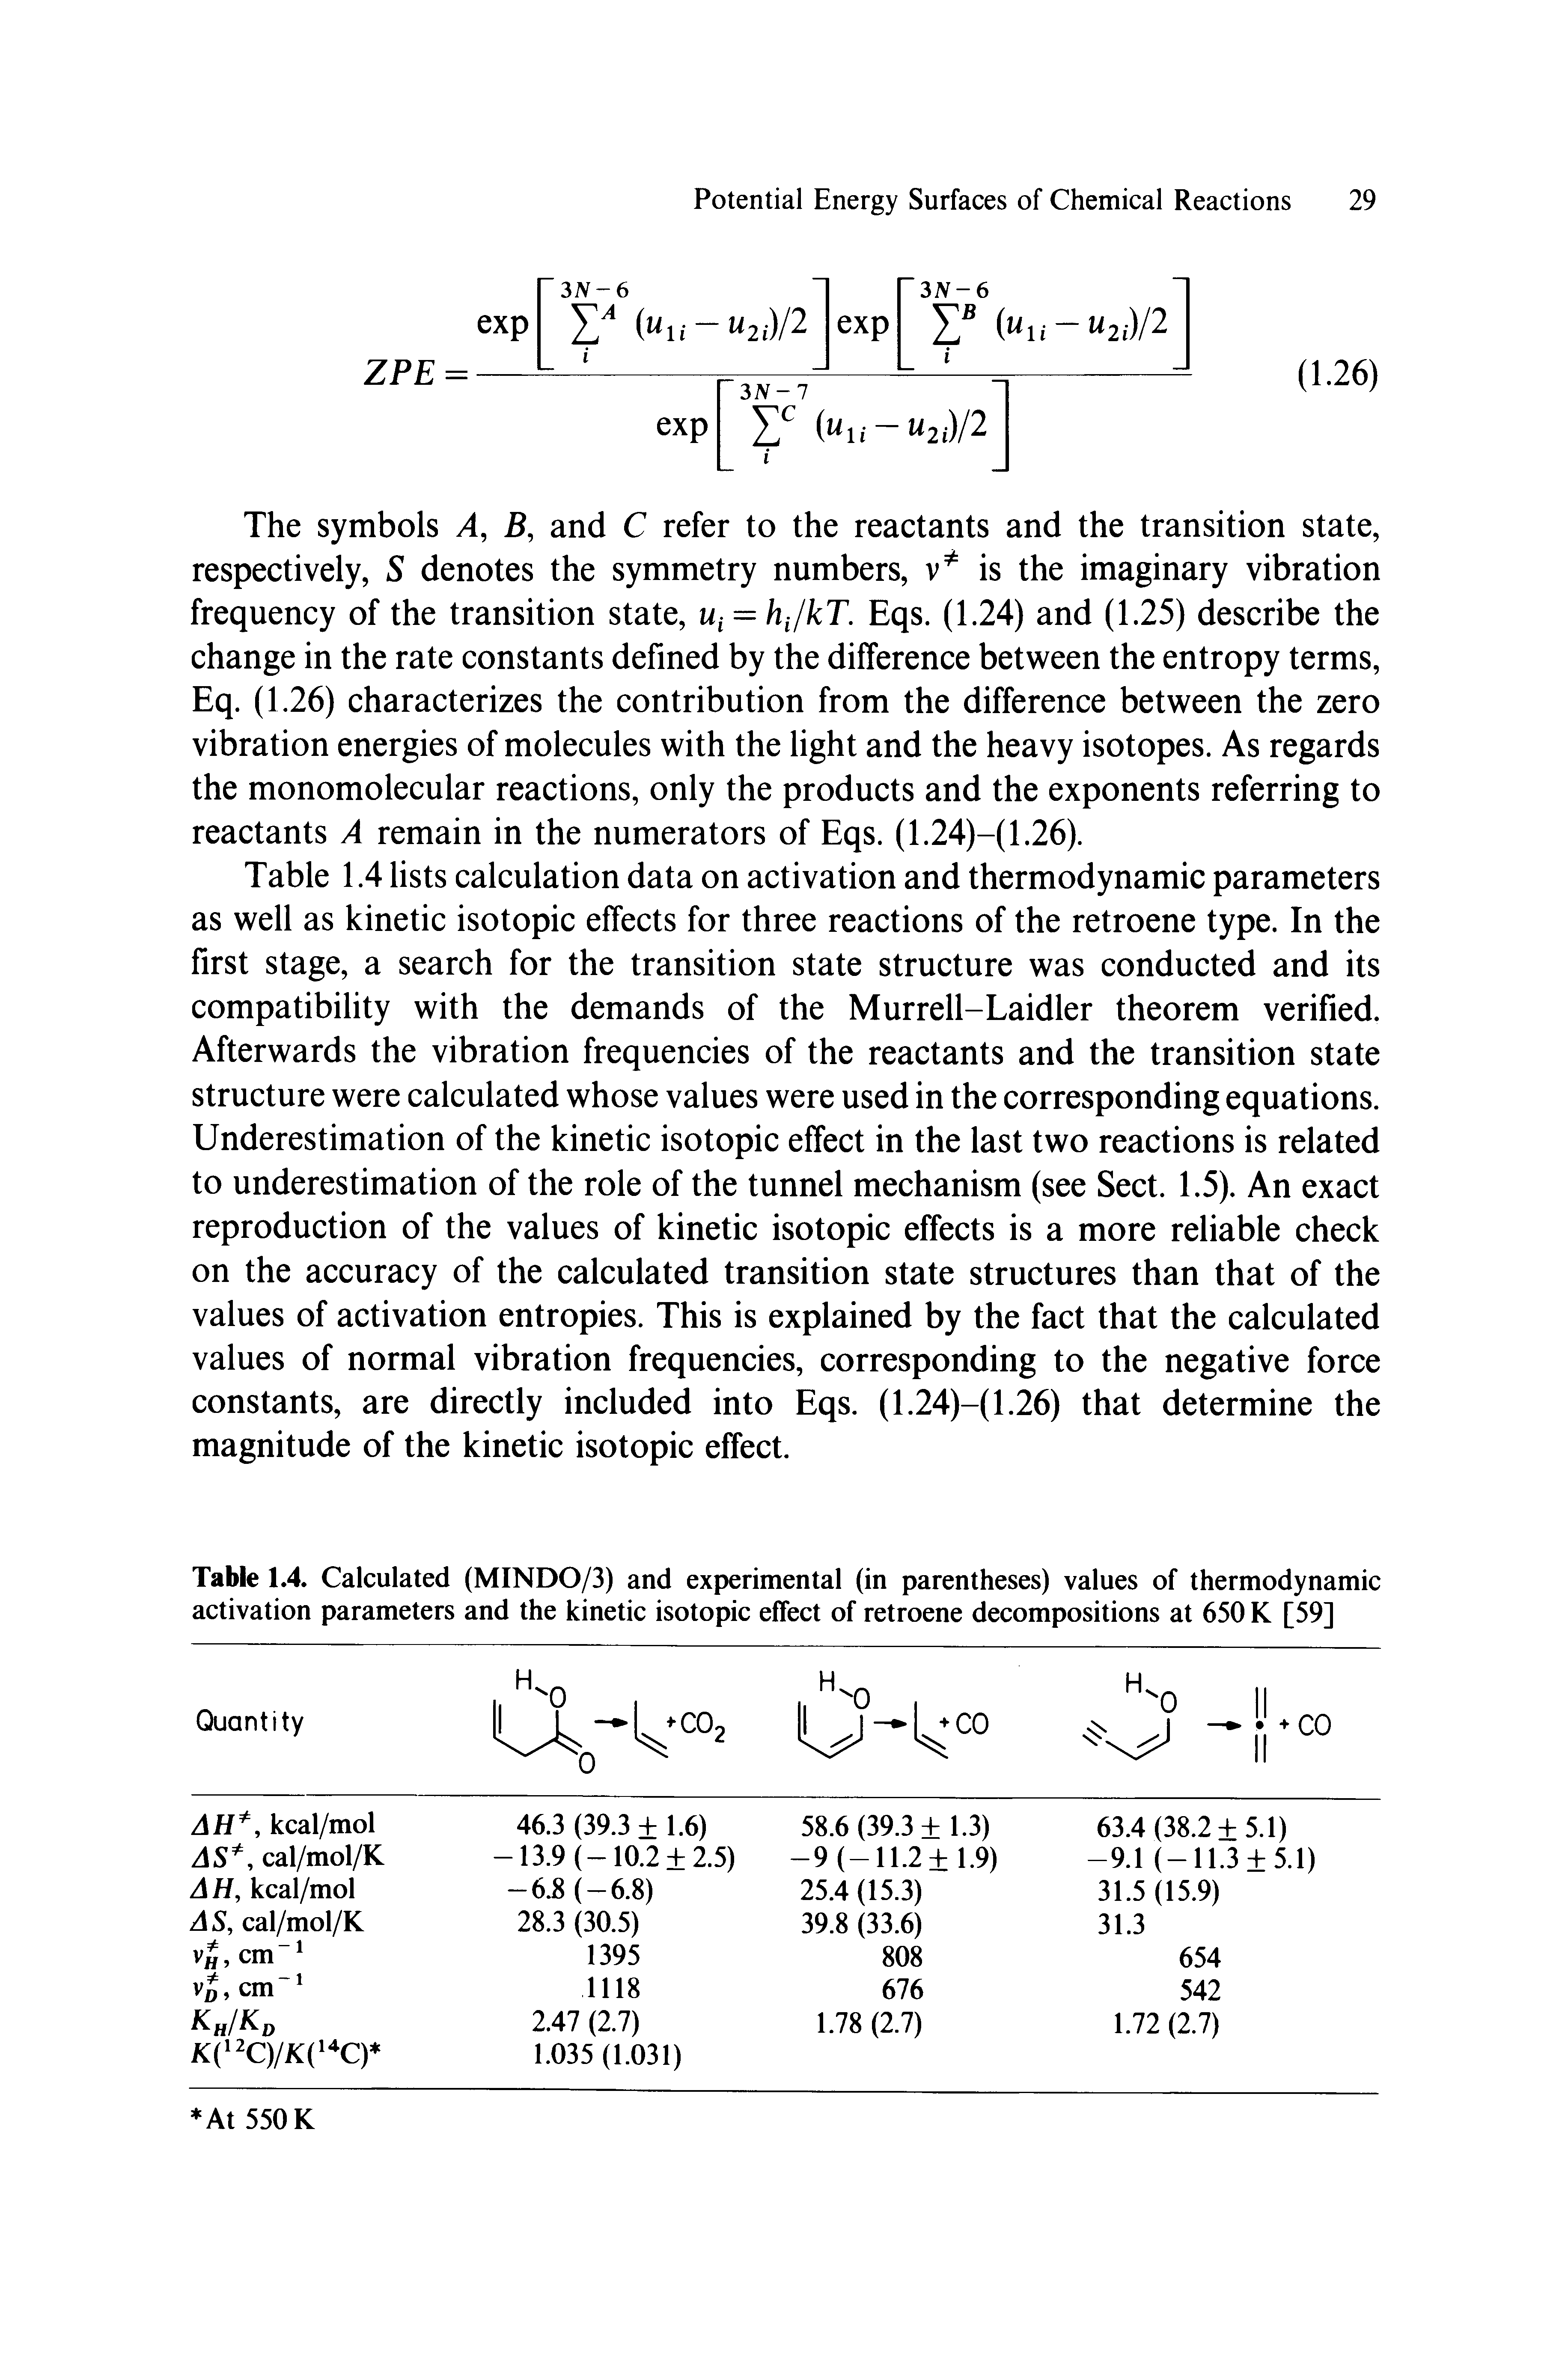 Table 1.4. Calculated (MINDO/3) and experimental (in parentheses) values of thermodynamic activation parameters and the kinetic isotopic effect of retroene decompositions at 650 K [59]...